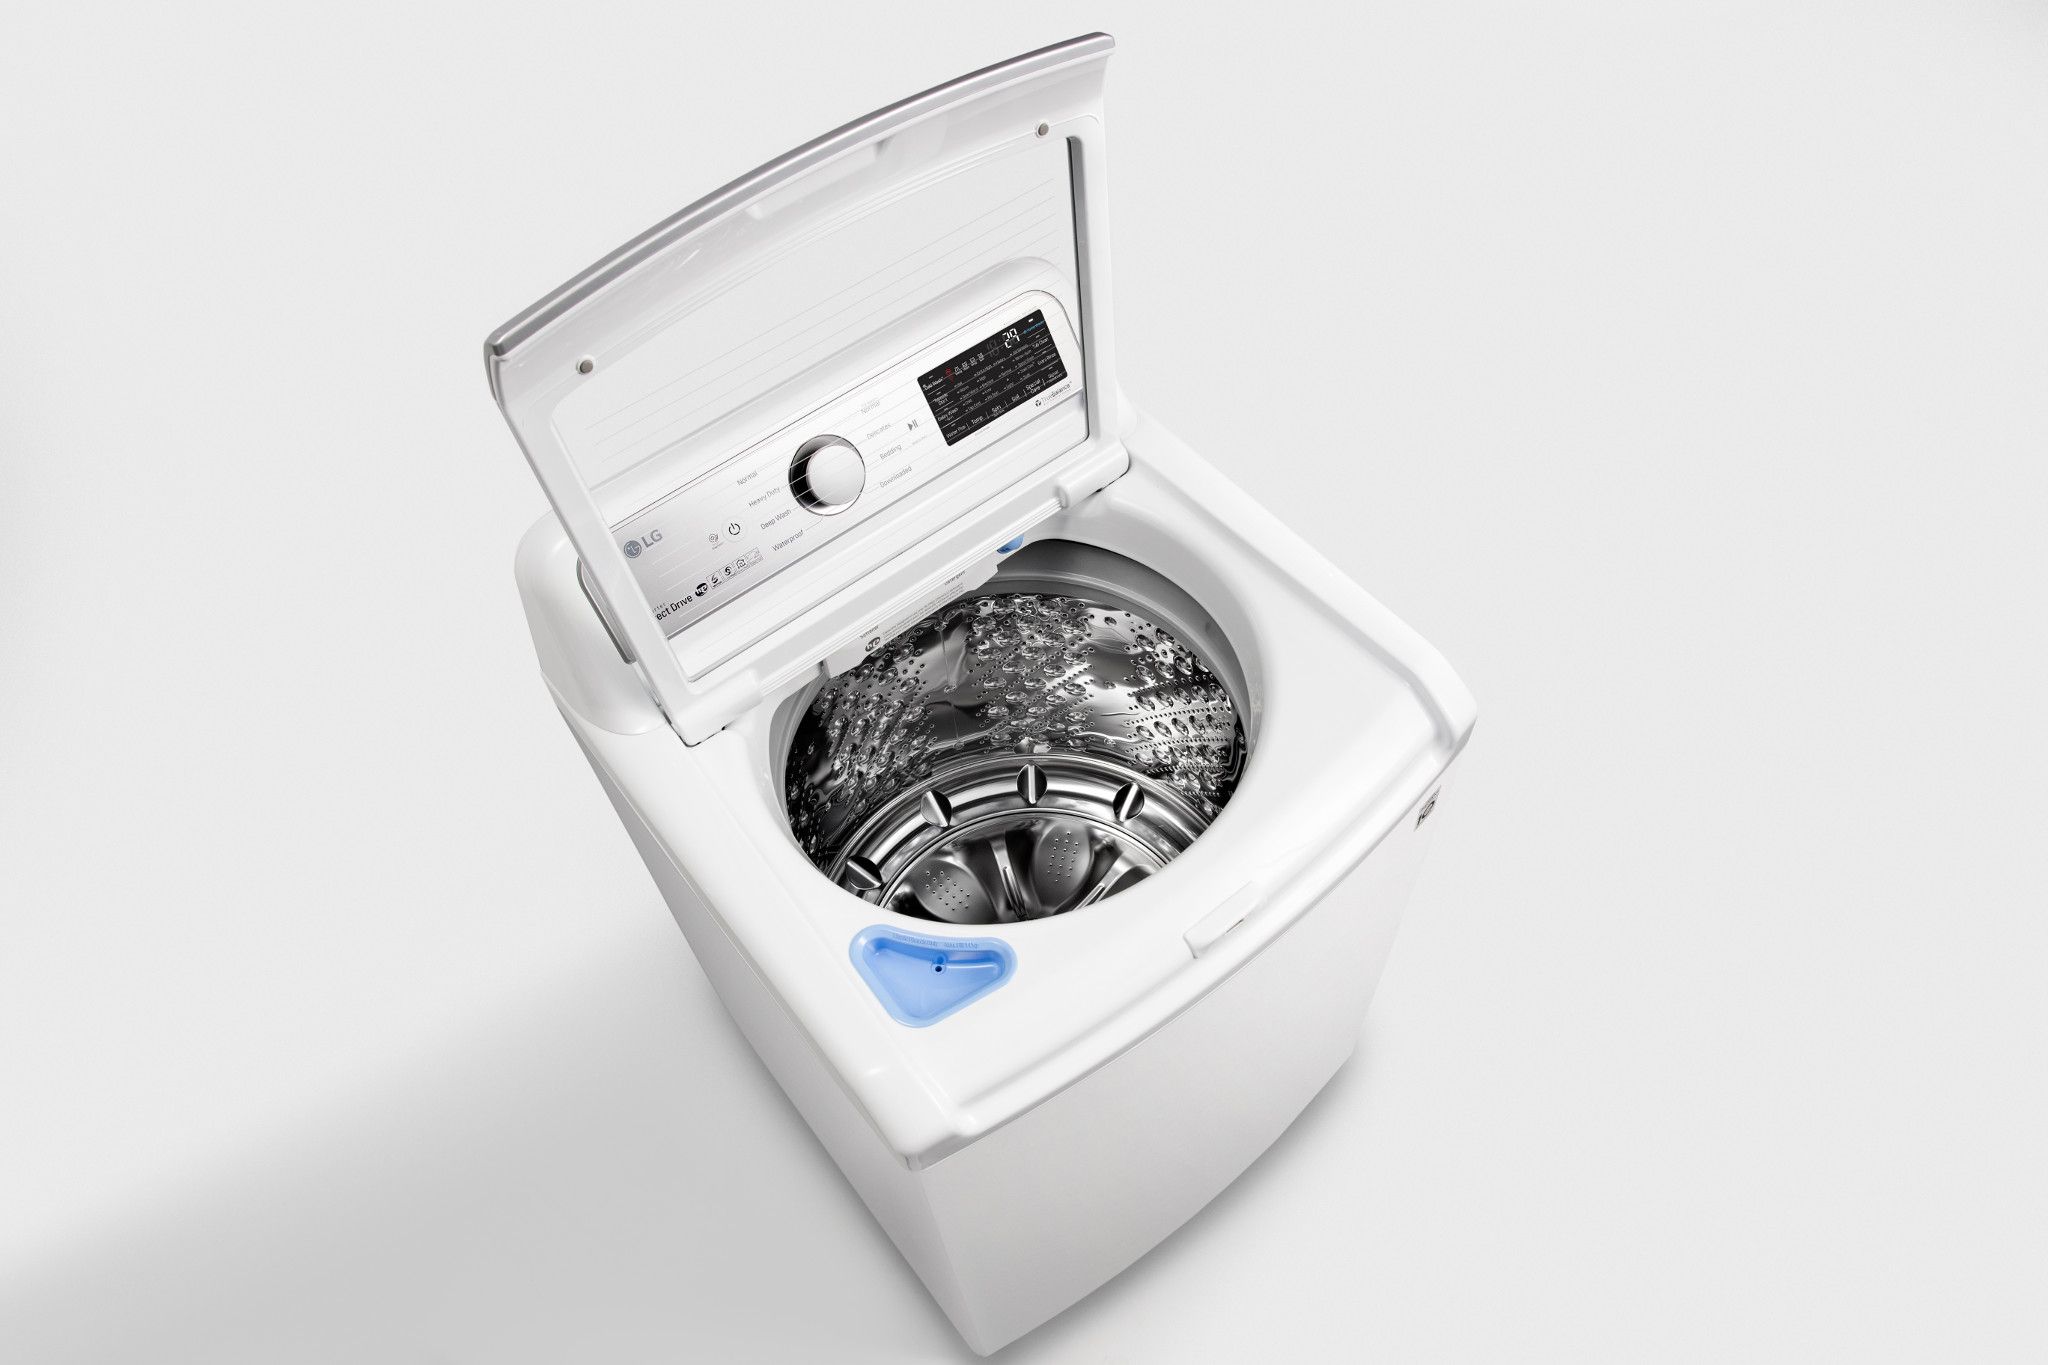 One of the best top load washer brands